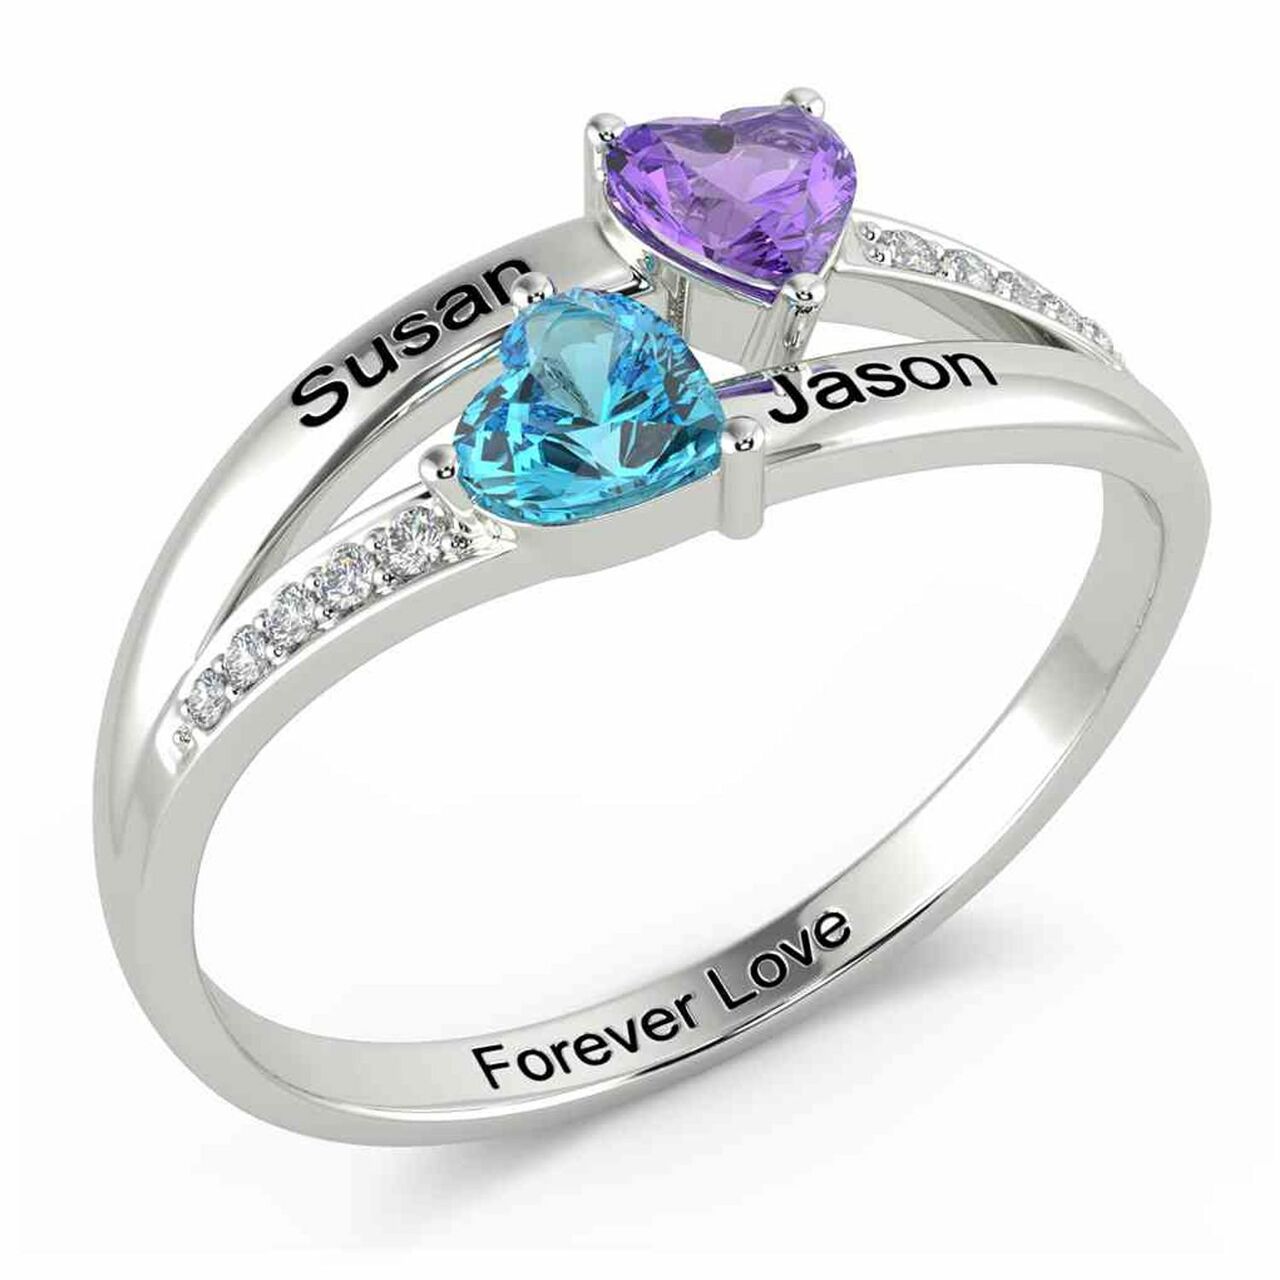 Personalized 925 Sterling Silver Two Hearts Birthstone Ring